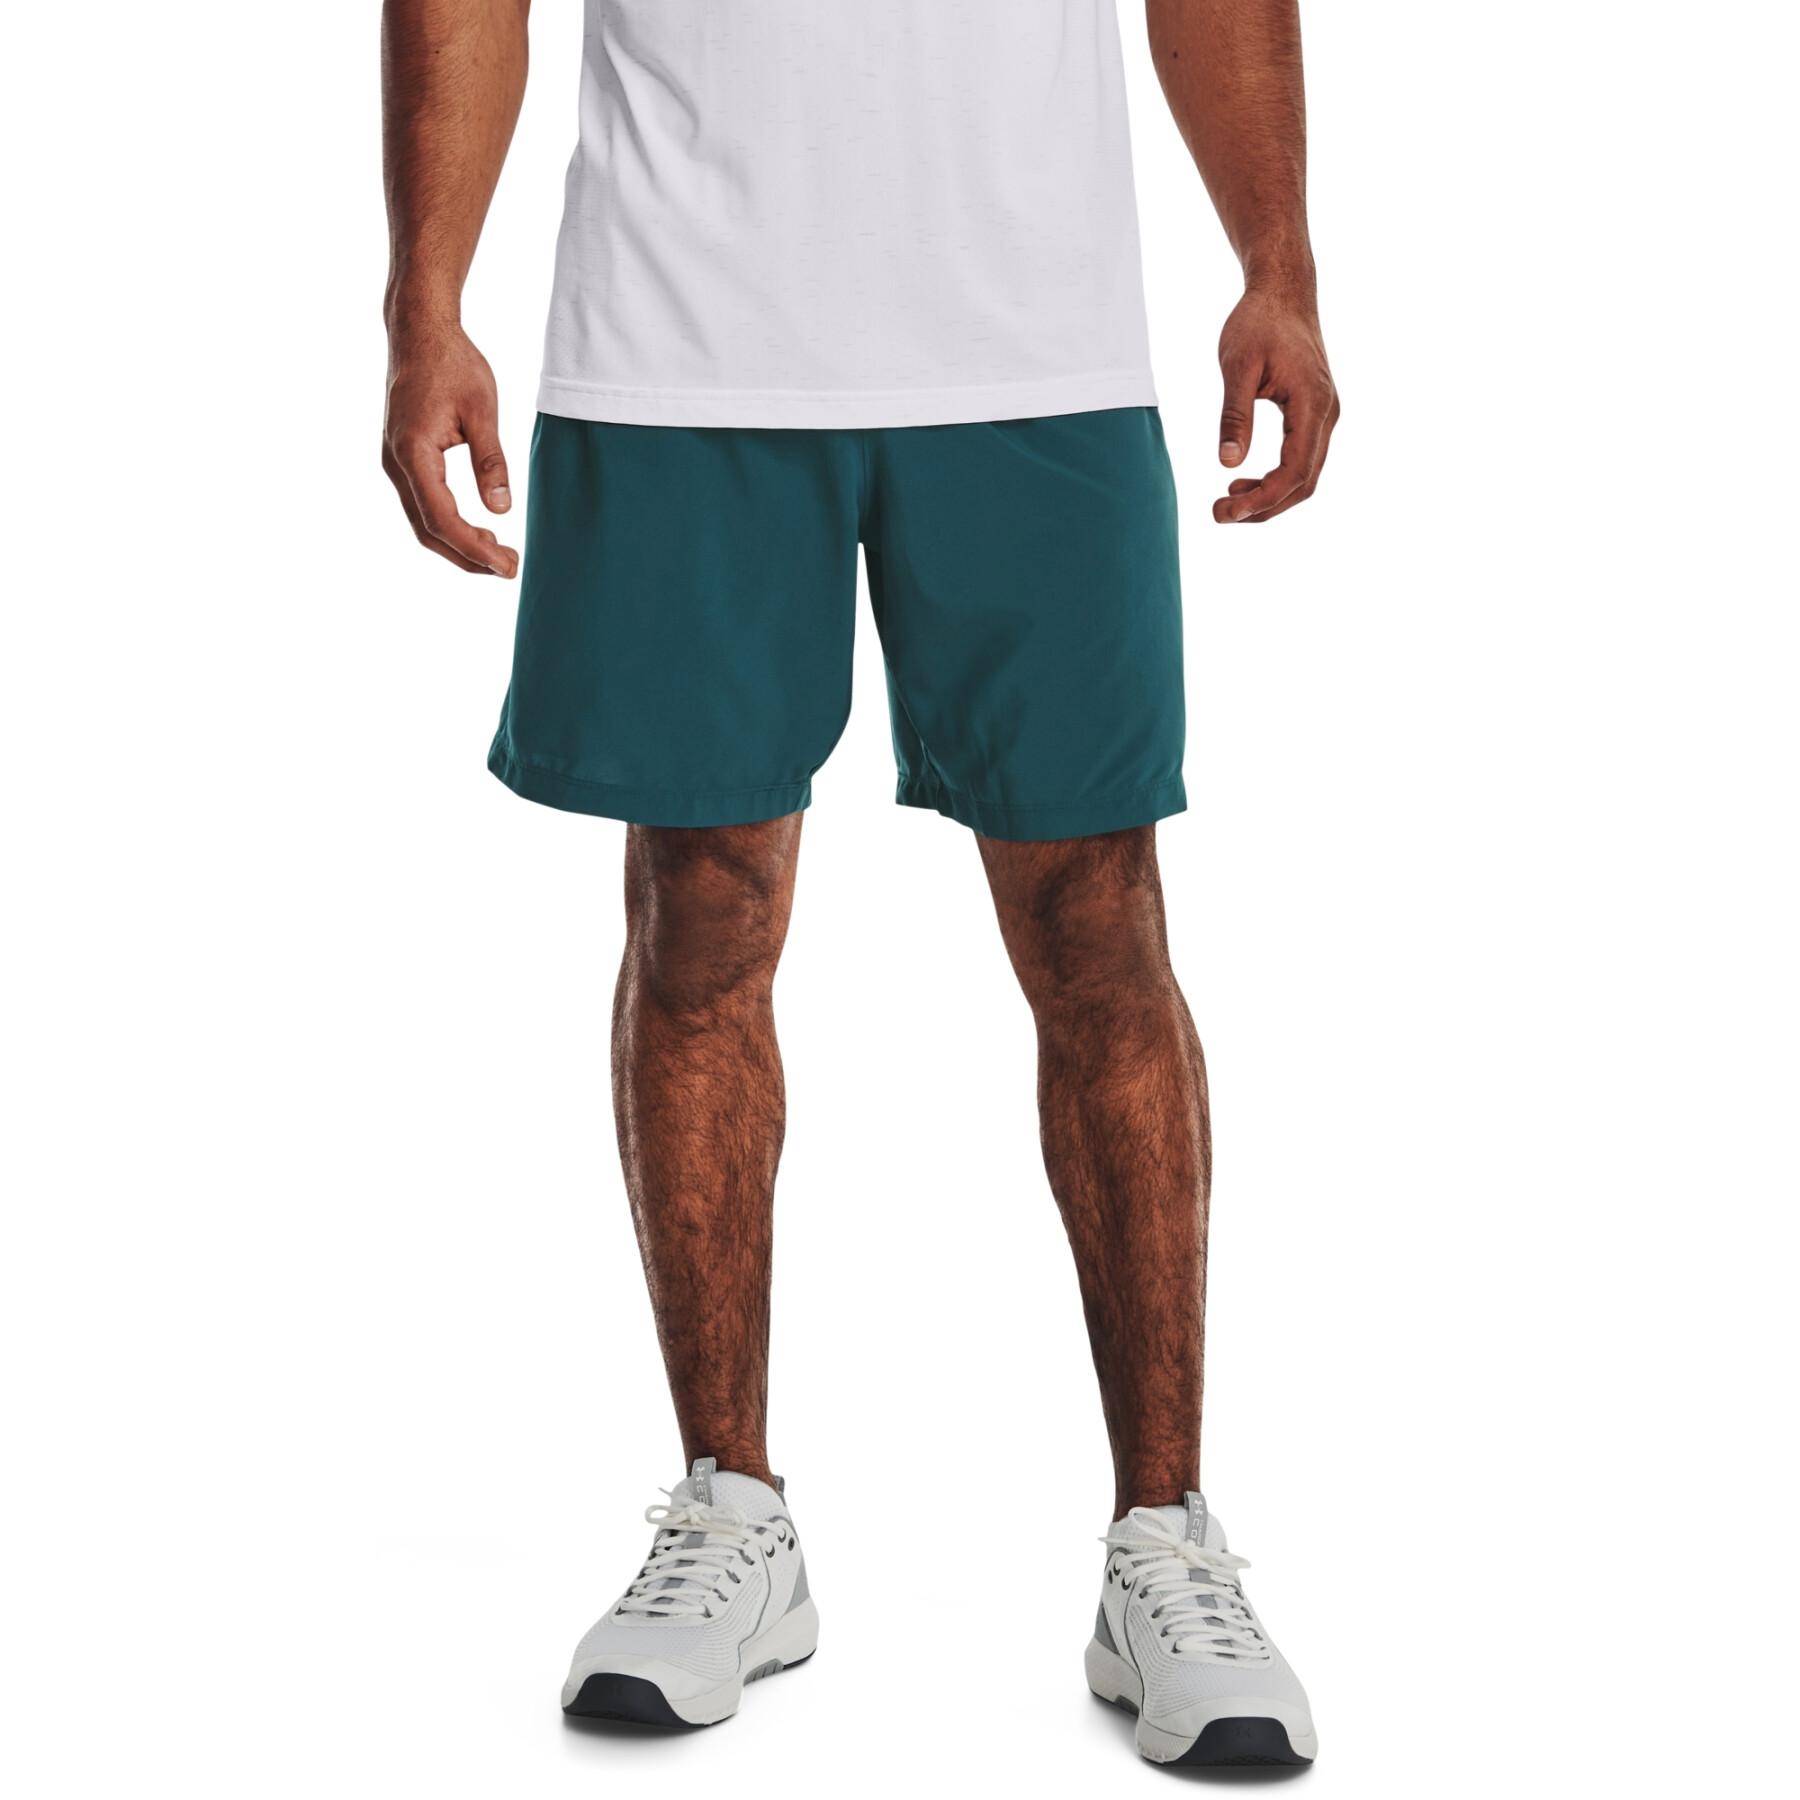 Woven shorts with pattern Under Armour Ua